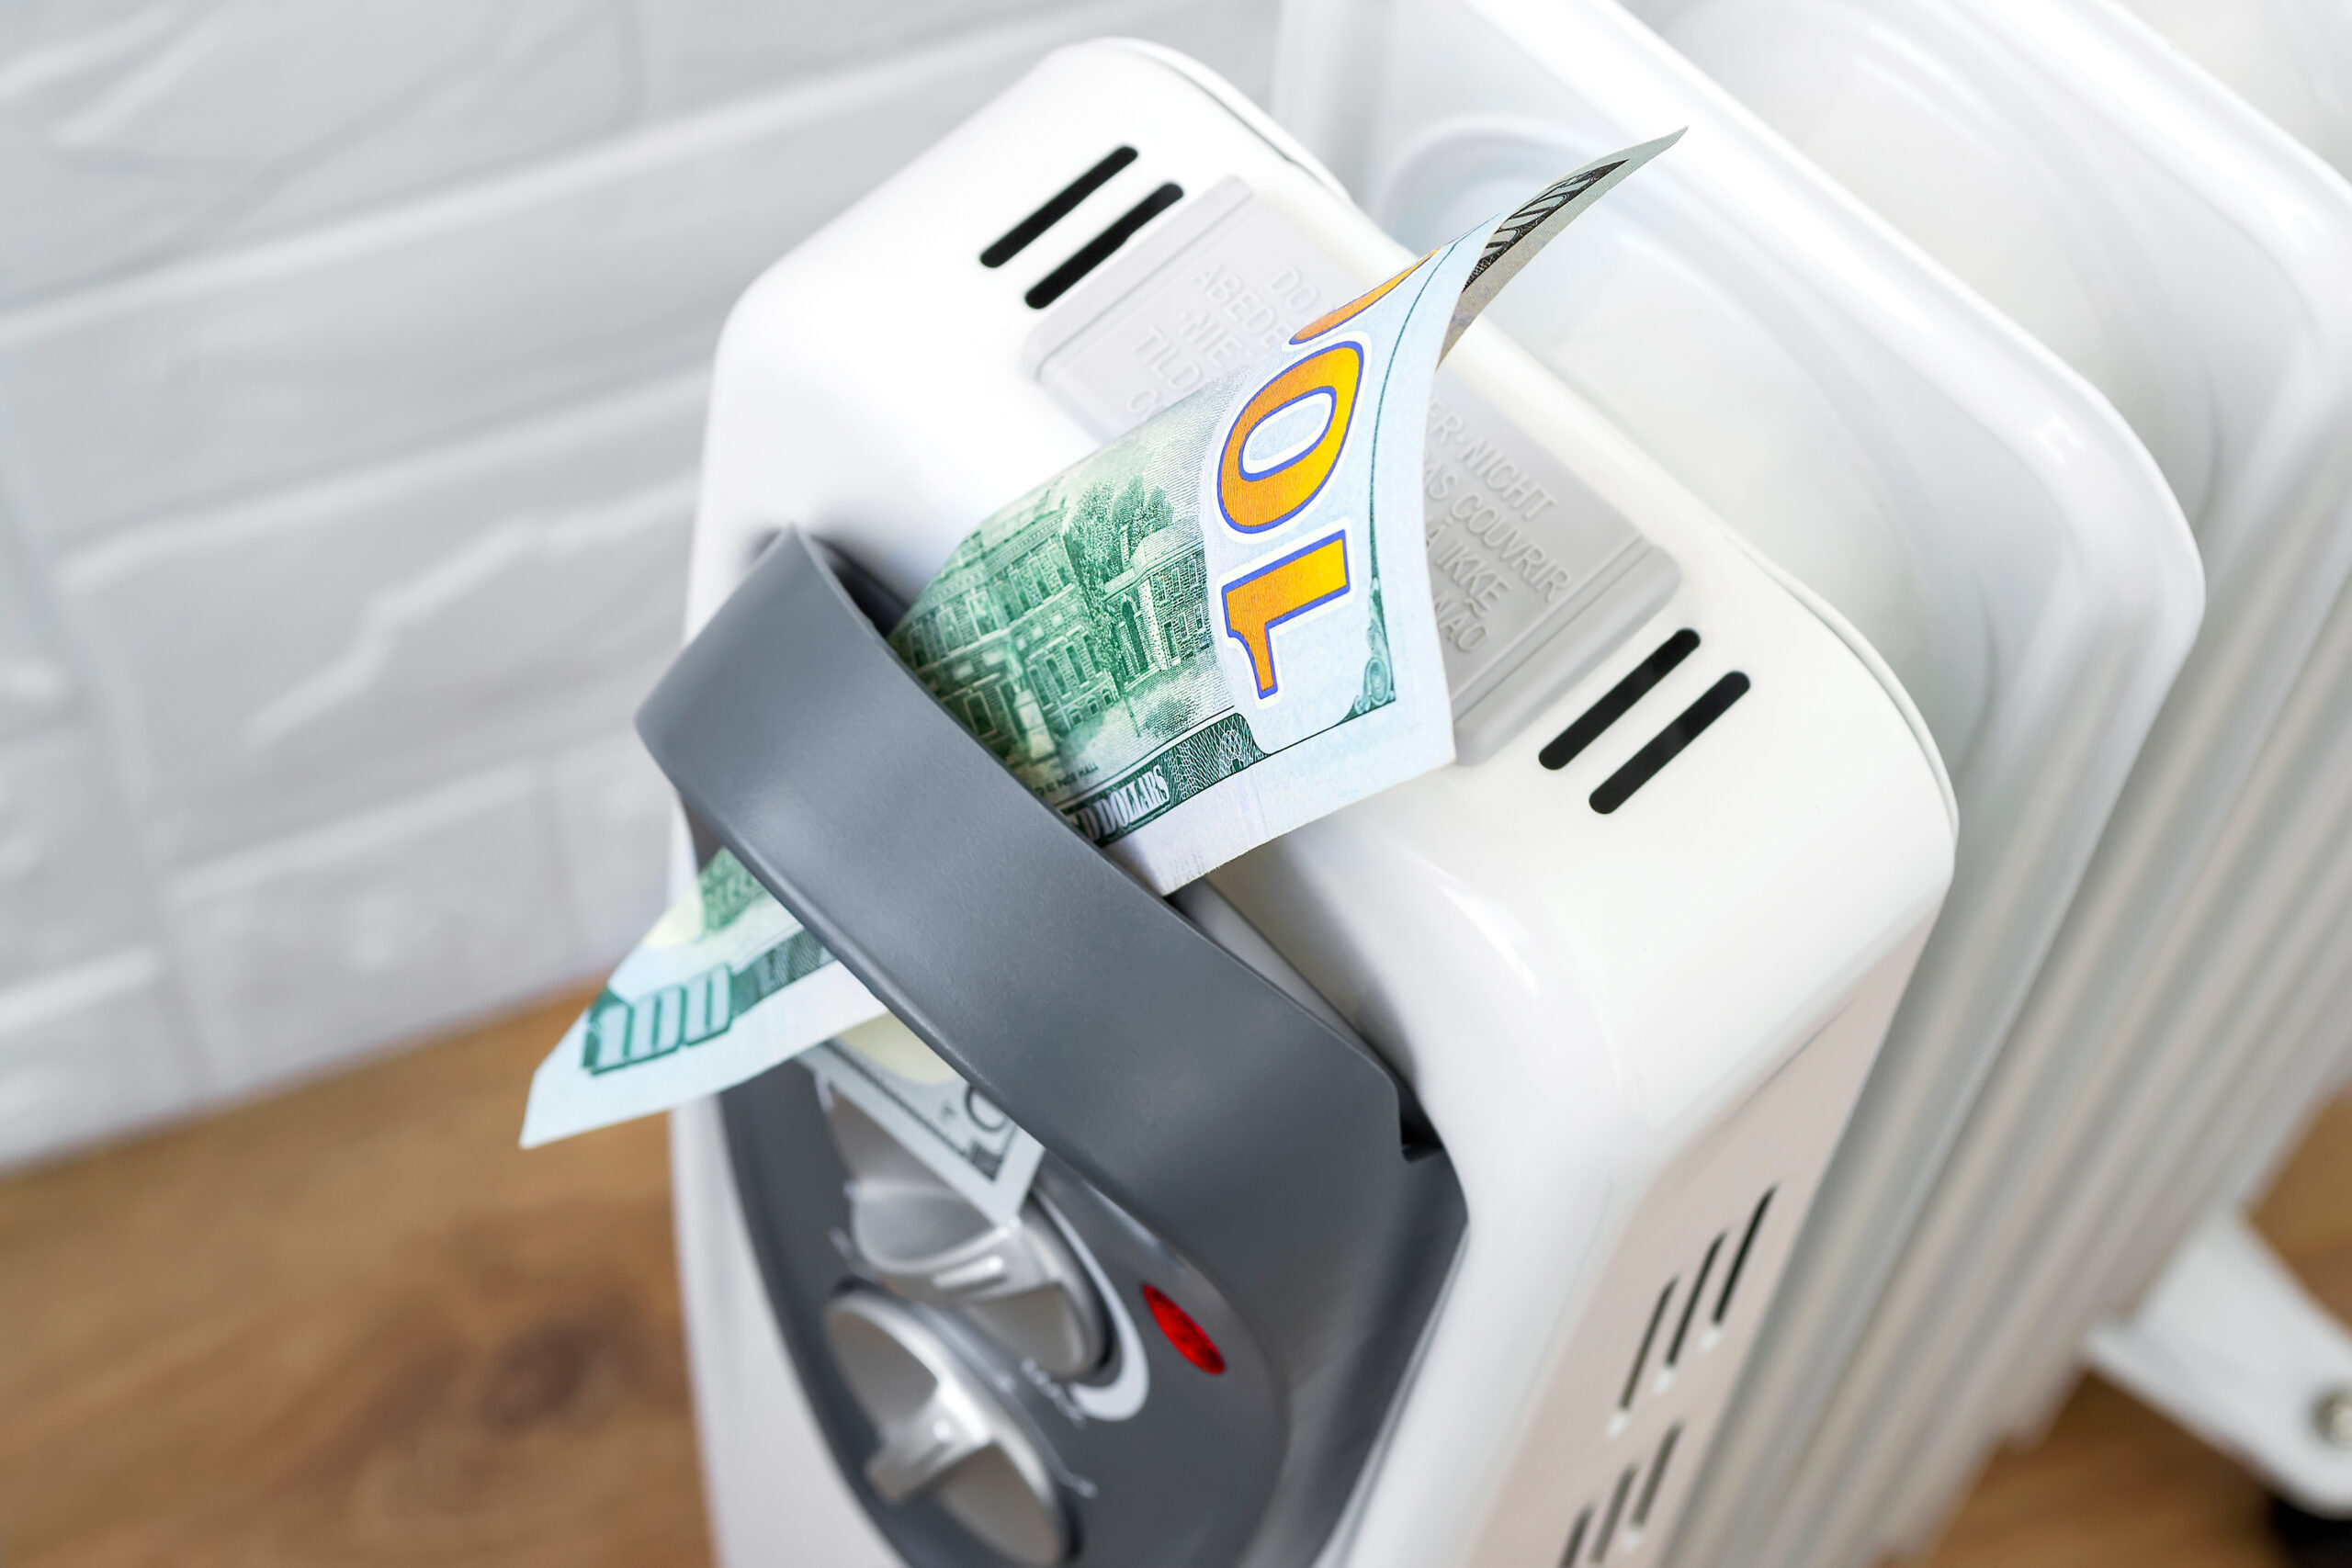 One hundred dollar bill in a handle of home electric oil radiator. Expensive electricity and higher electricity costs during the cold season concepts